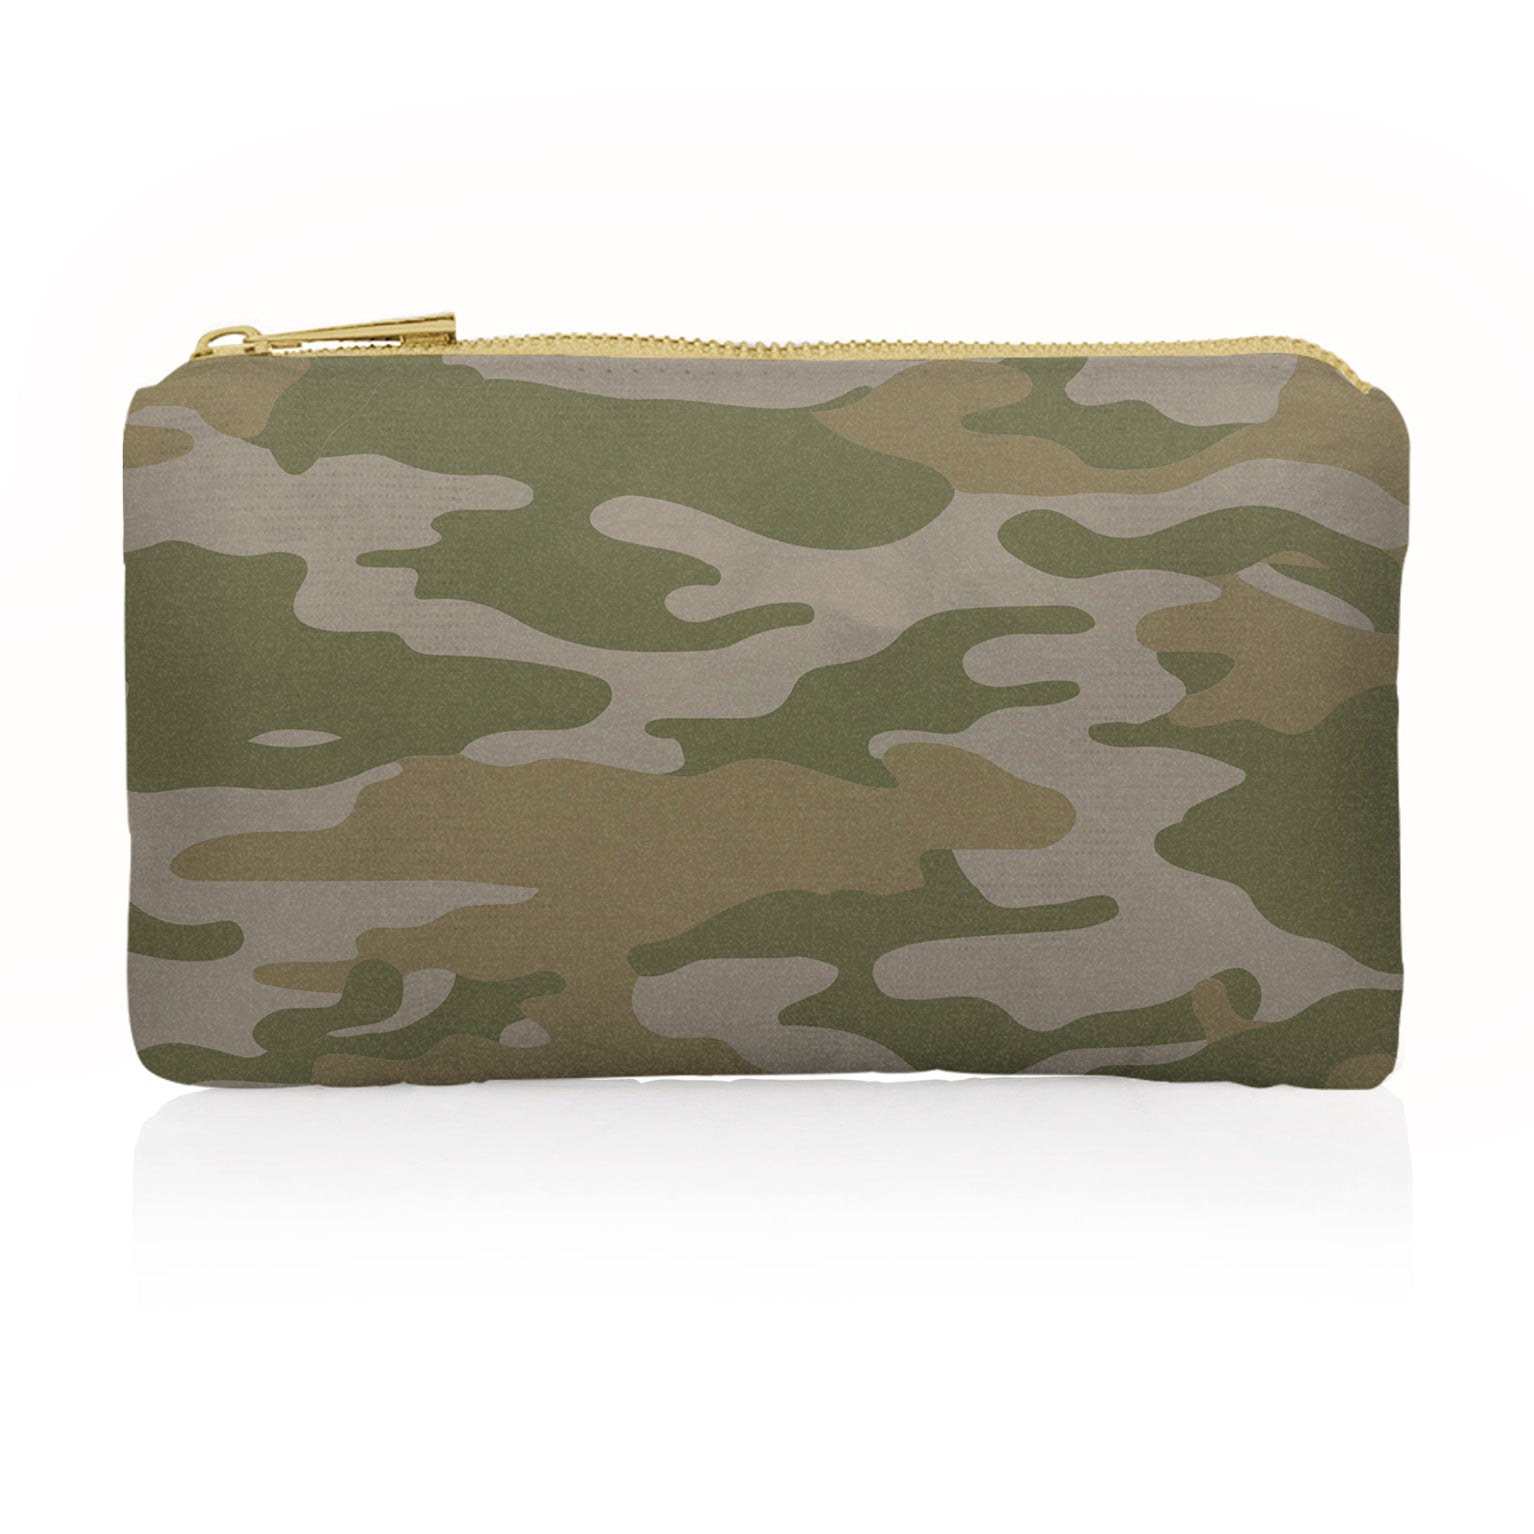 Mini Pack in Shimmer Army Green Camo